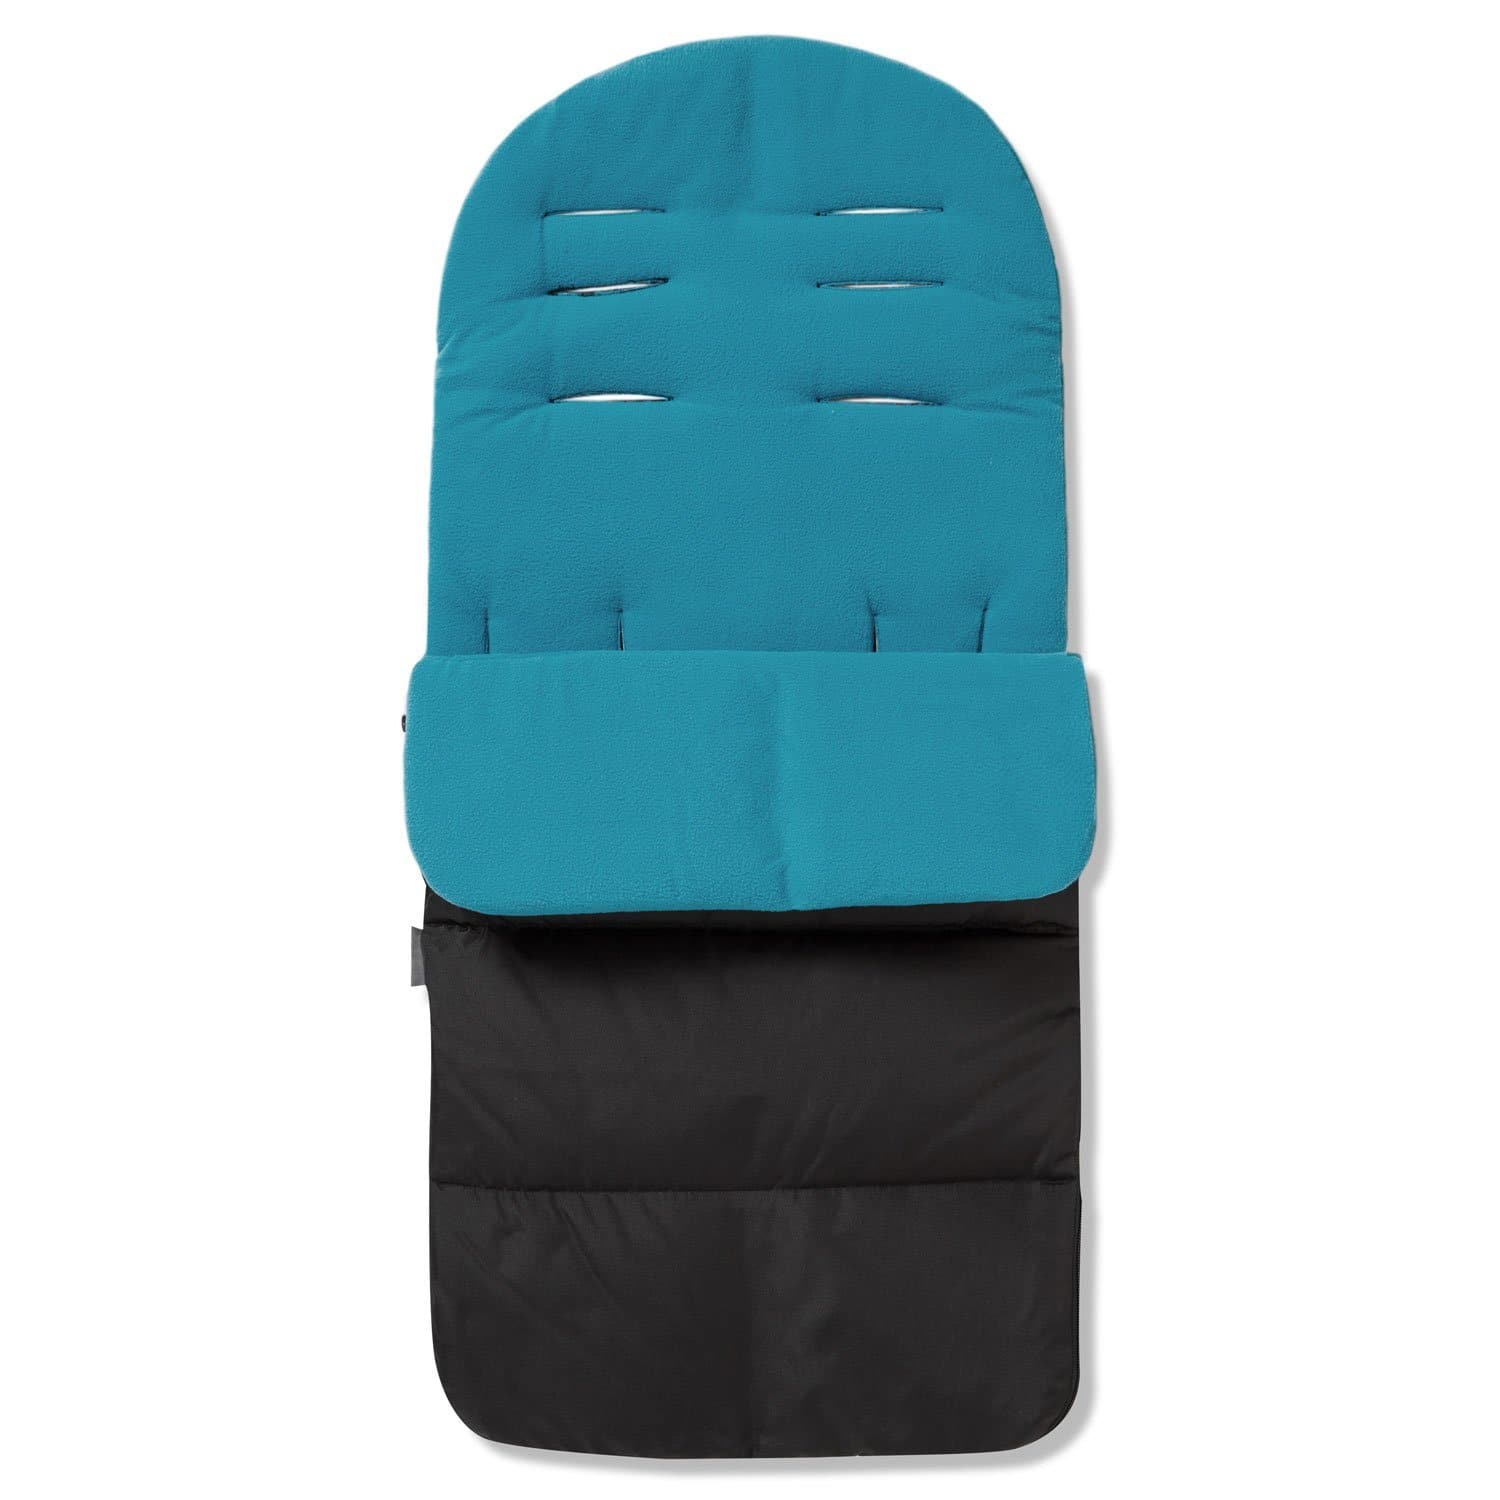 Premium Footmuff / Cosy Toes Compatible with Teutonia - Ocean Blue / Fits All Models | For Your Little One